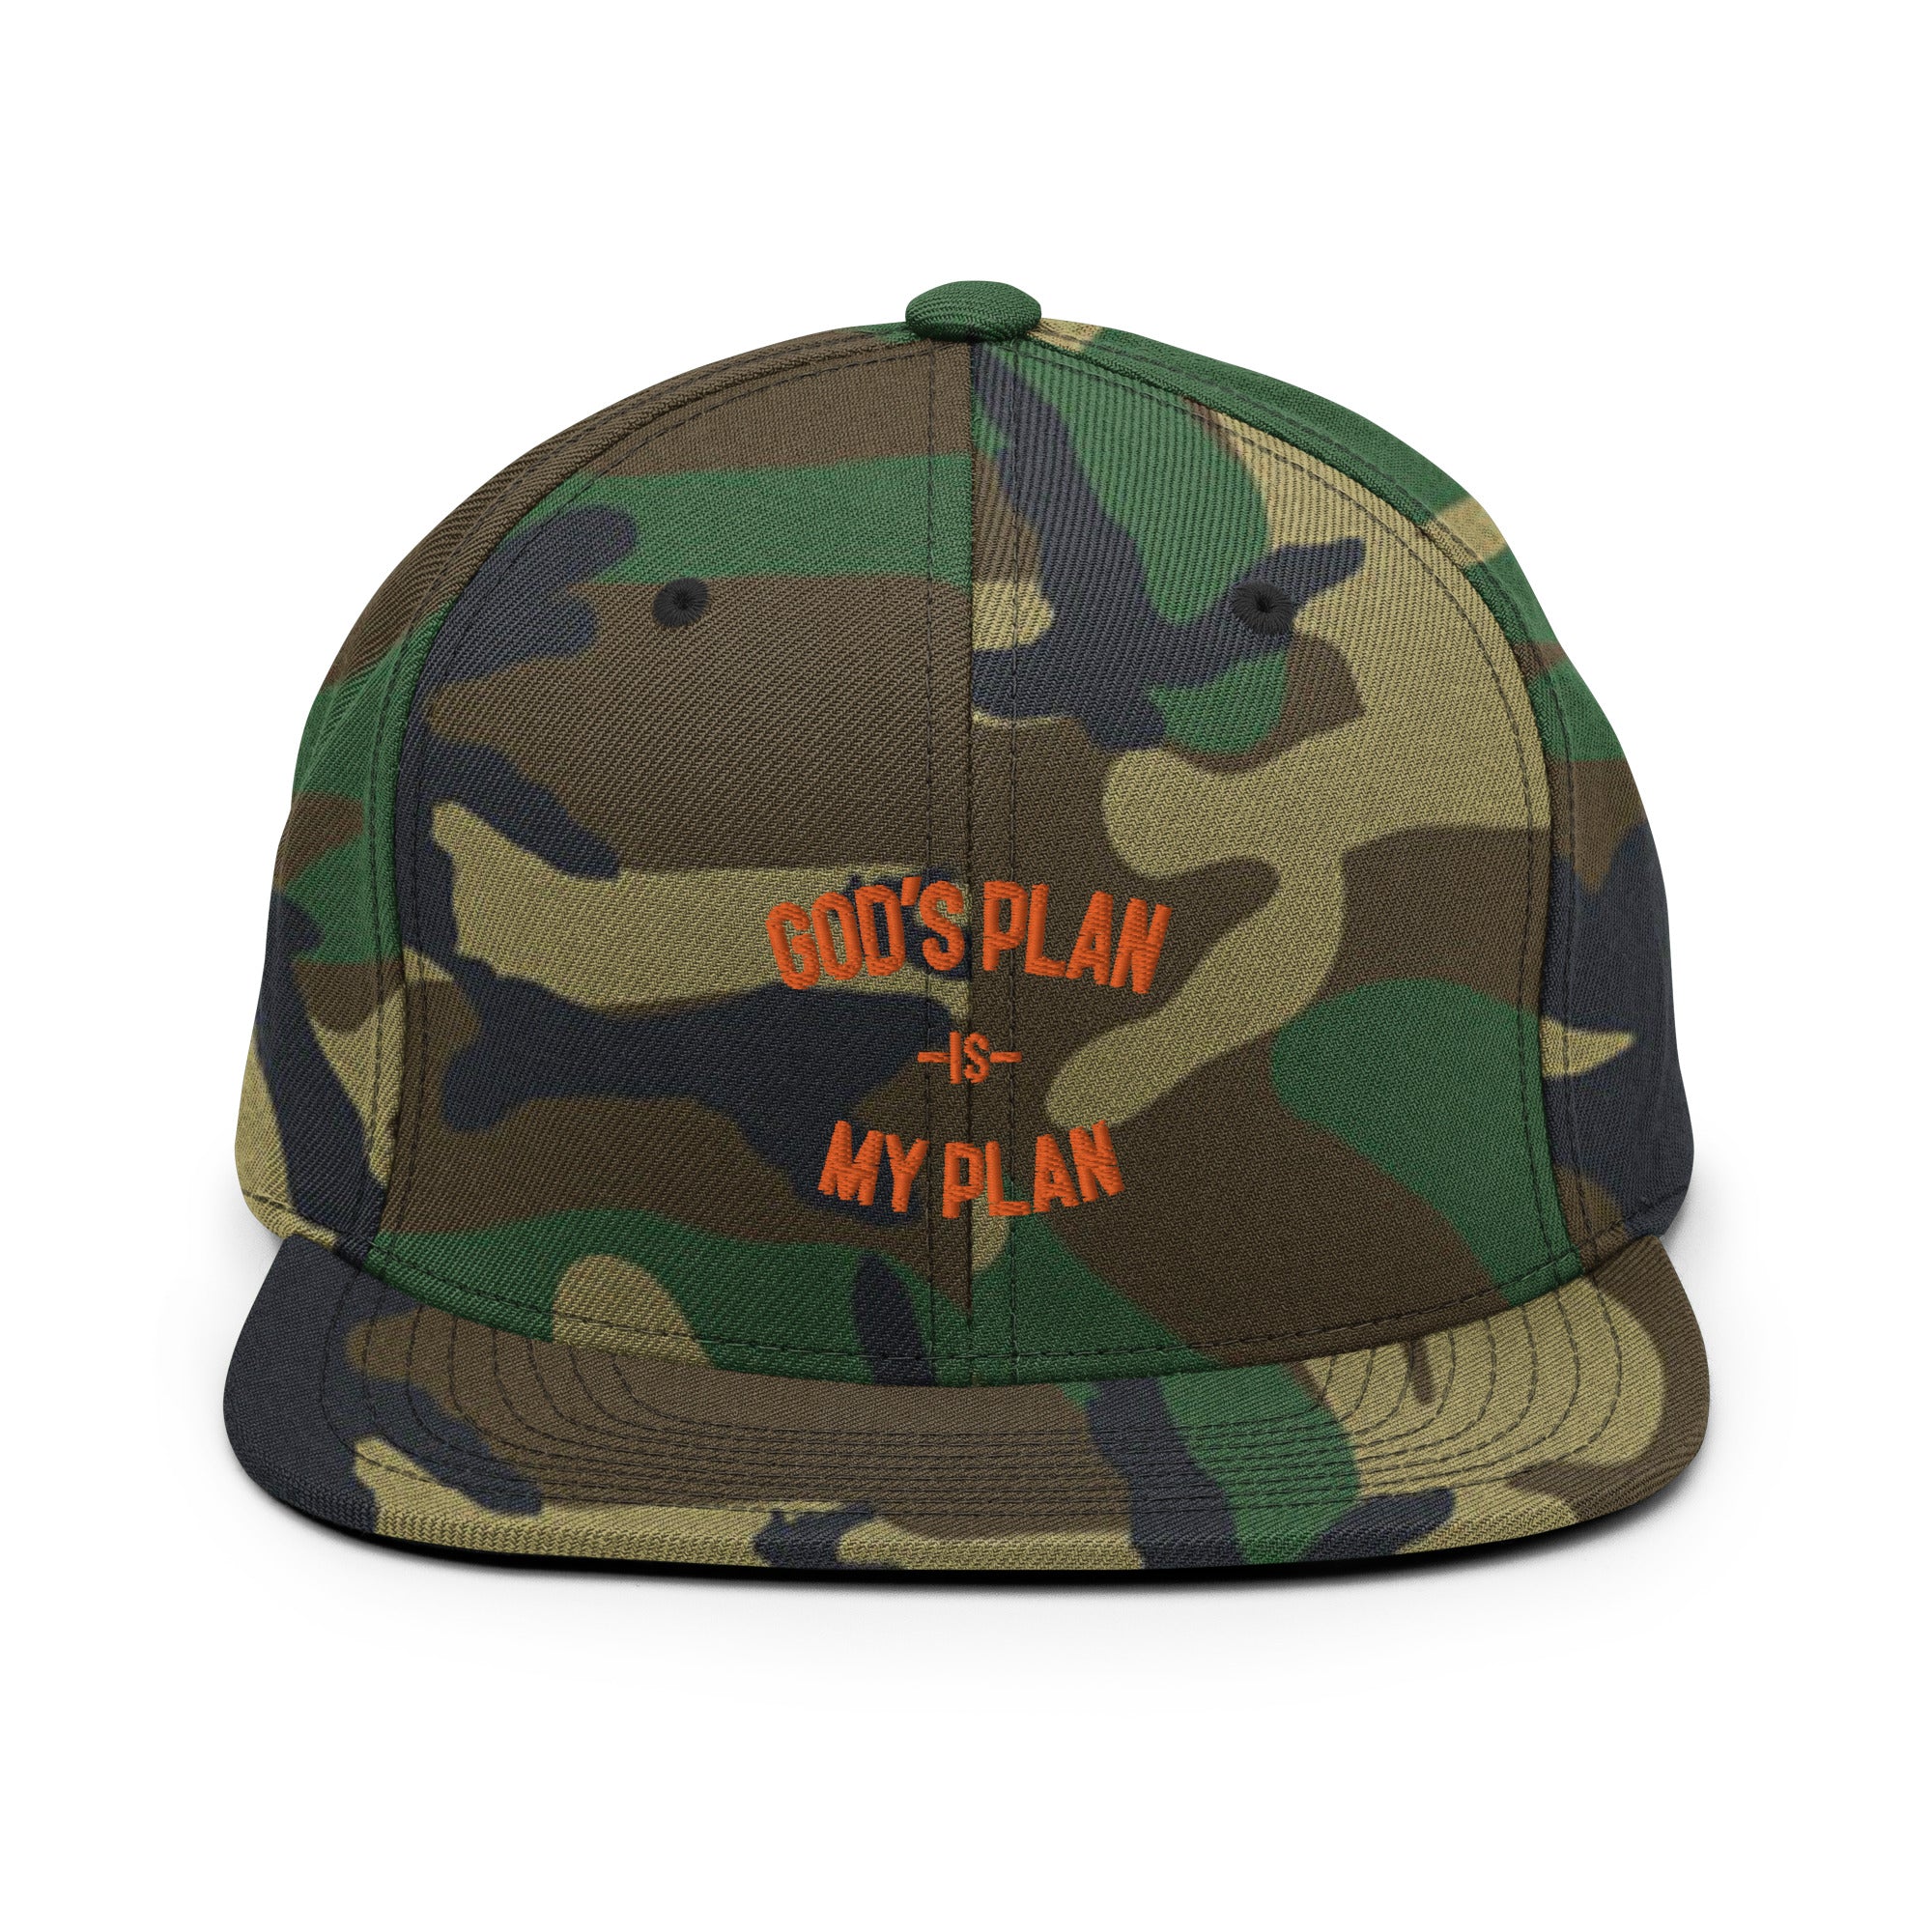 God's Plan Camo Snapback Hat, Used By God, Used By God Clothing, Christian Apparel, Christian Hats, Christian T-Shirts, Christian Clothing, God Shirts, Christian Sweatshirts, God Clothing, Jesus Hoodie, Jesus Clothes, God Is Dope, Art Of Homage, Red Letter Clothing, Elevated Faith, Active Faith Sports, Beacon Threads, God The Father Apparel